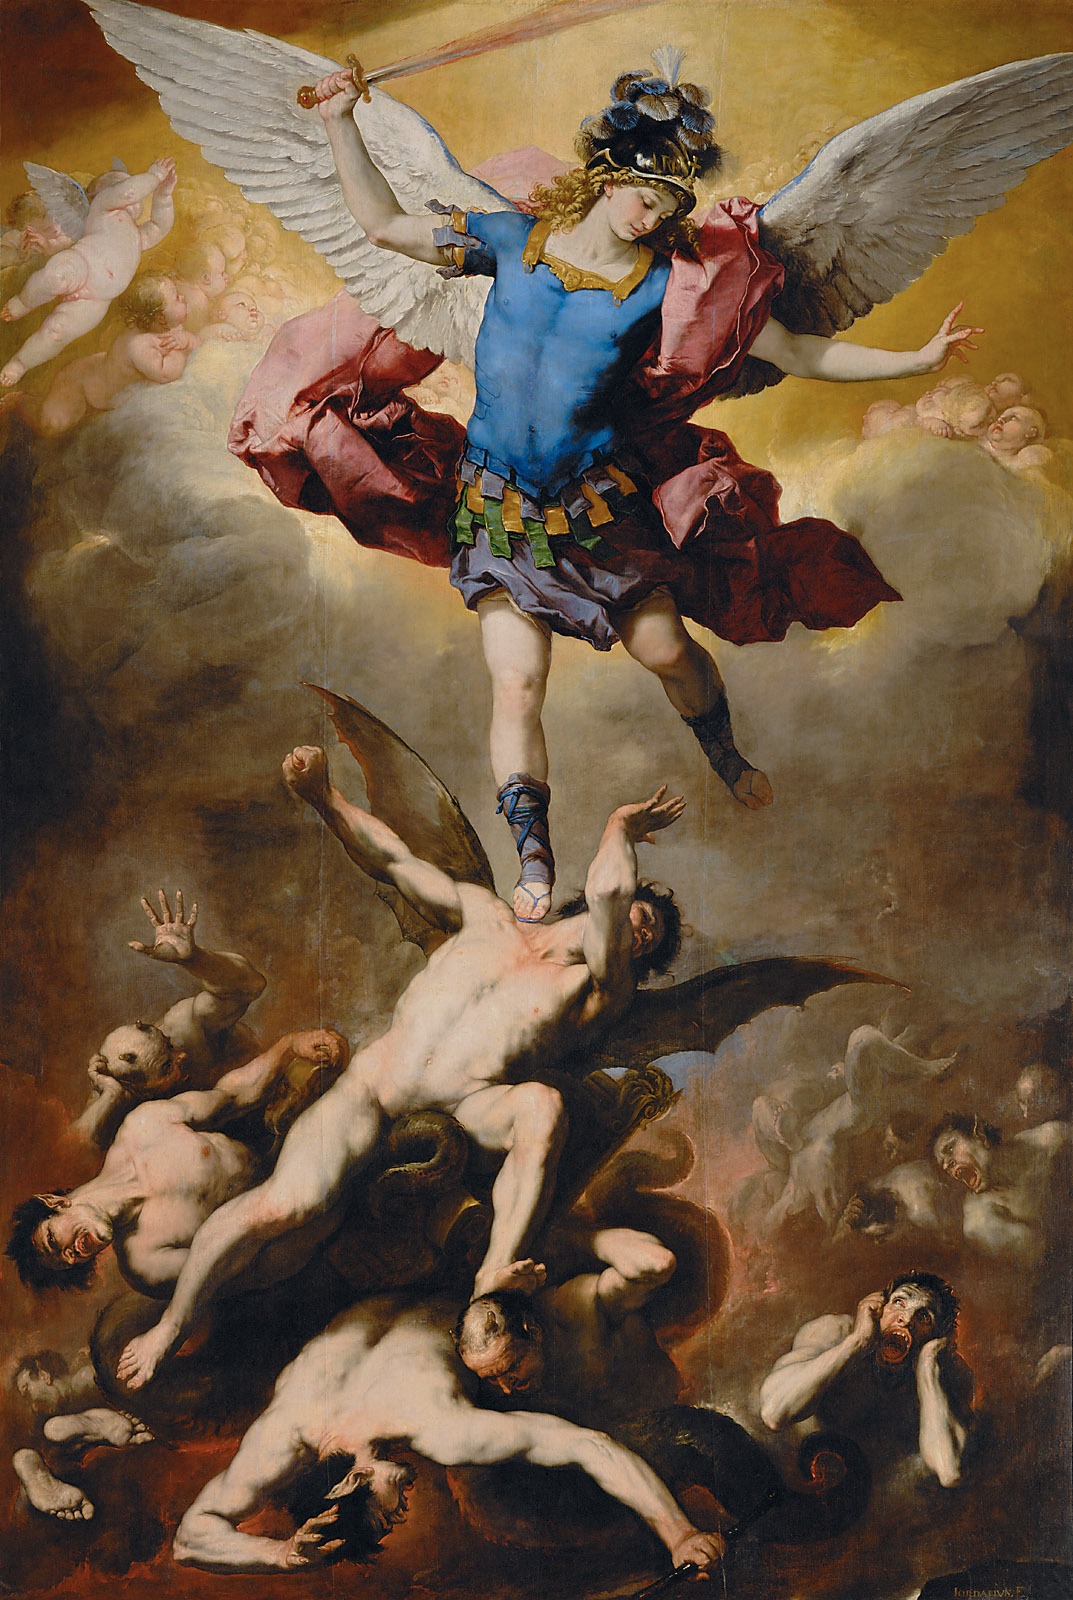 St. Michael Vanquishing the Devils by Luca Giordano - c. 1664 - 419 x 283 cm Kunsthistorisches Museum